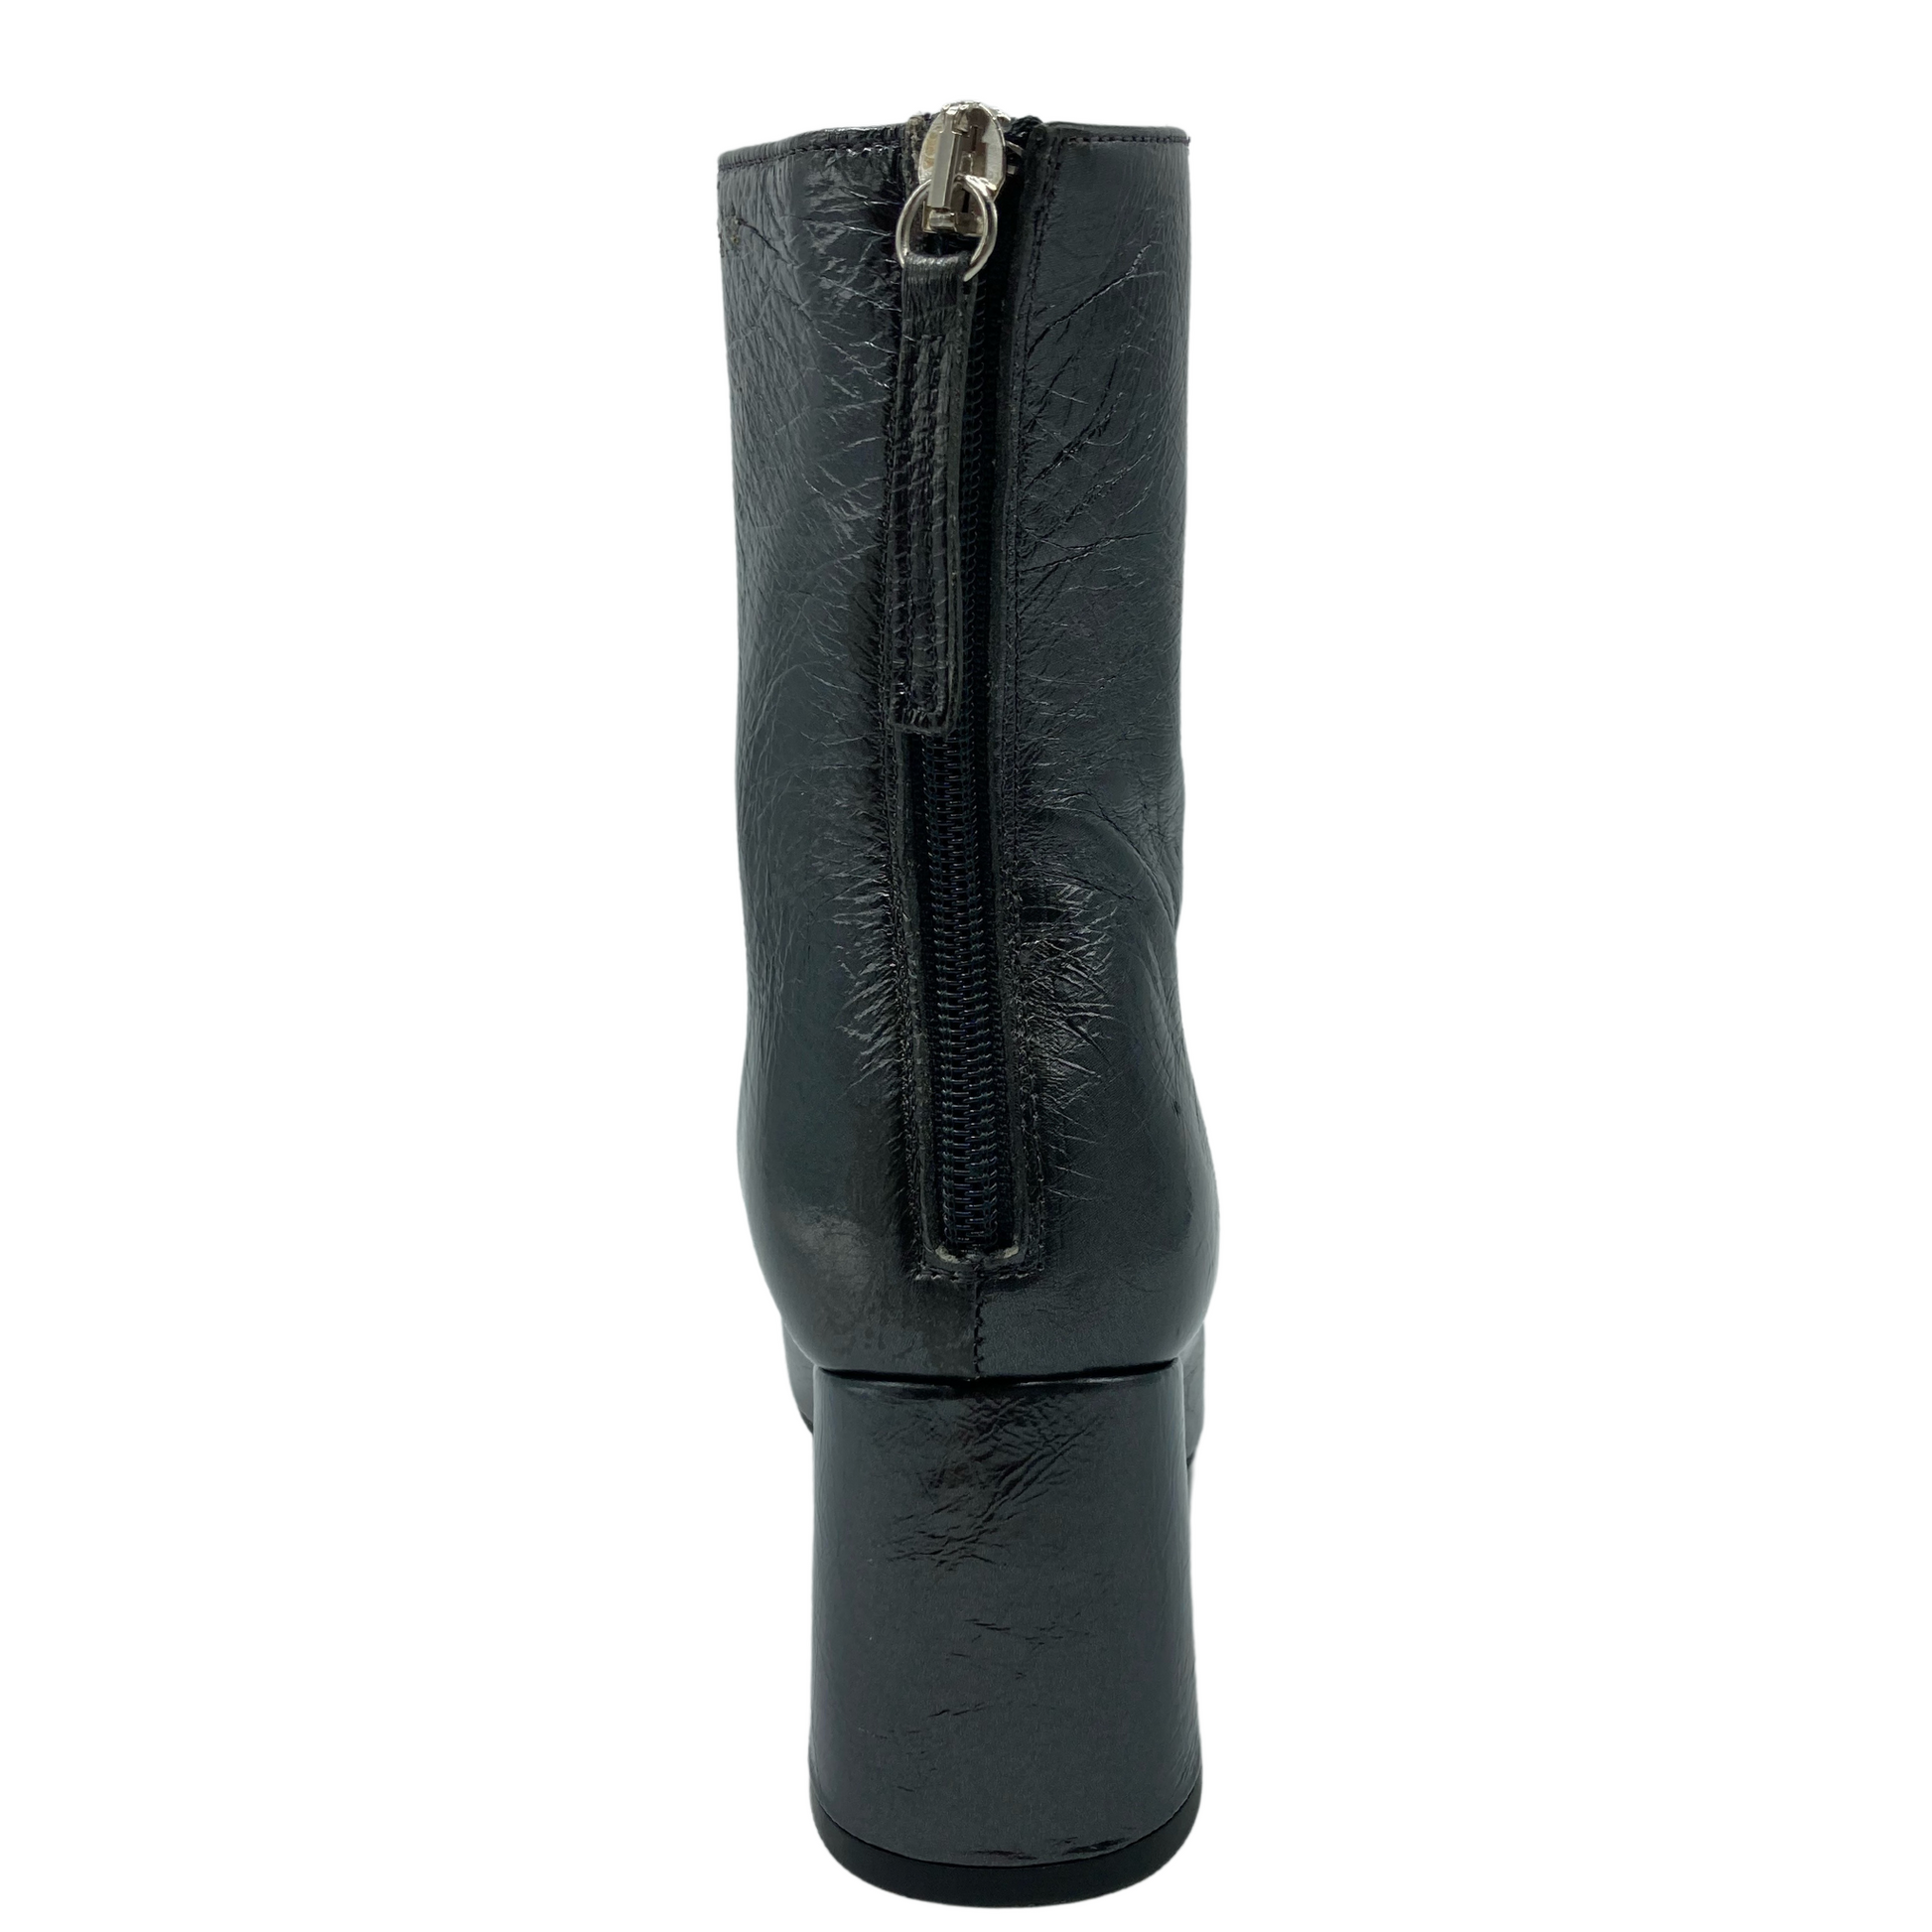 Back view of textured leather short boot with back zipper closure and block heel